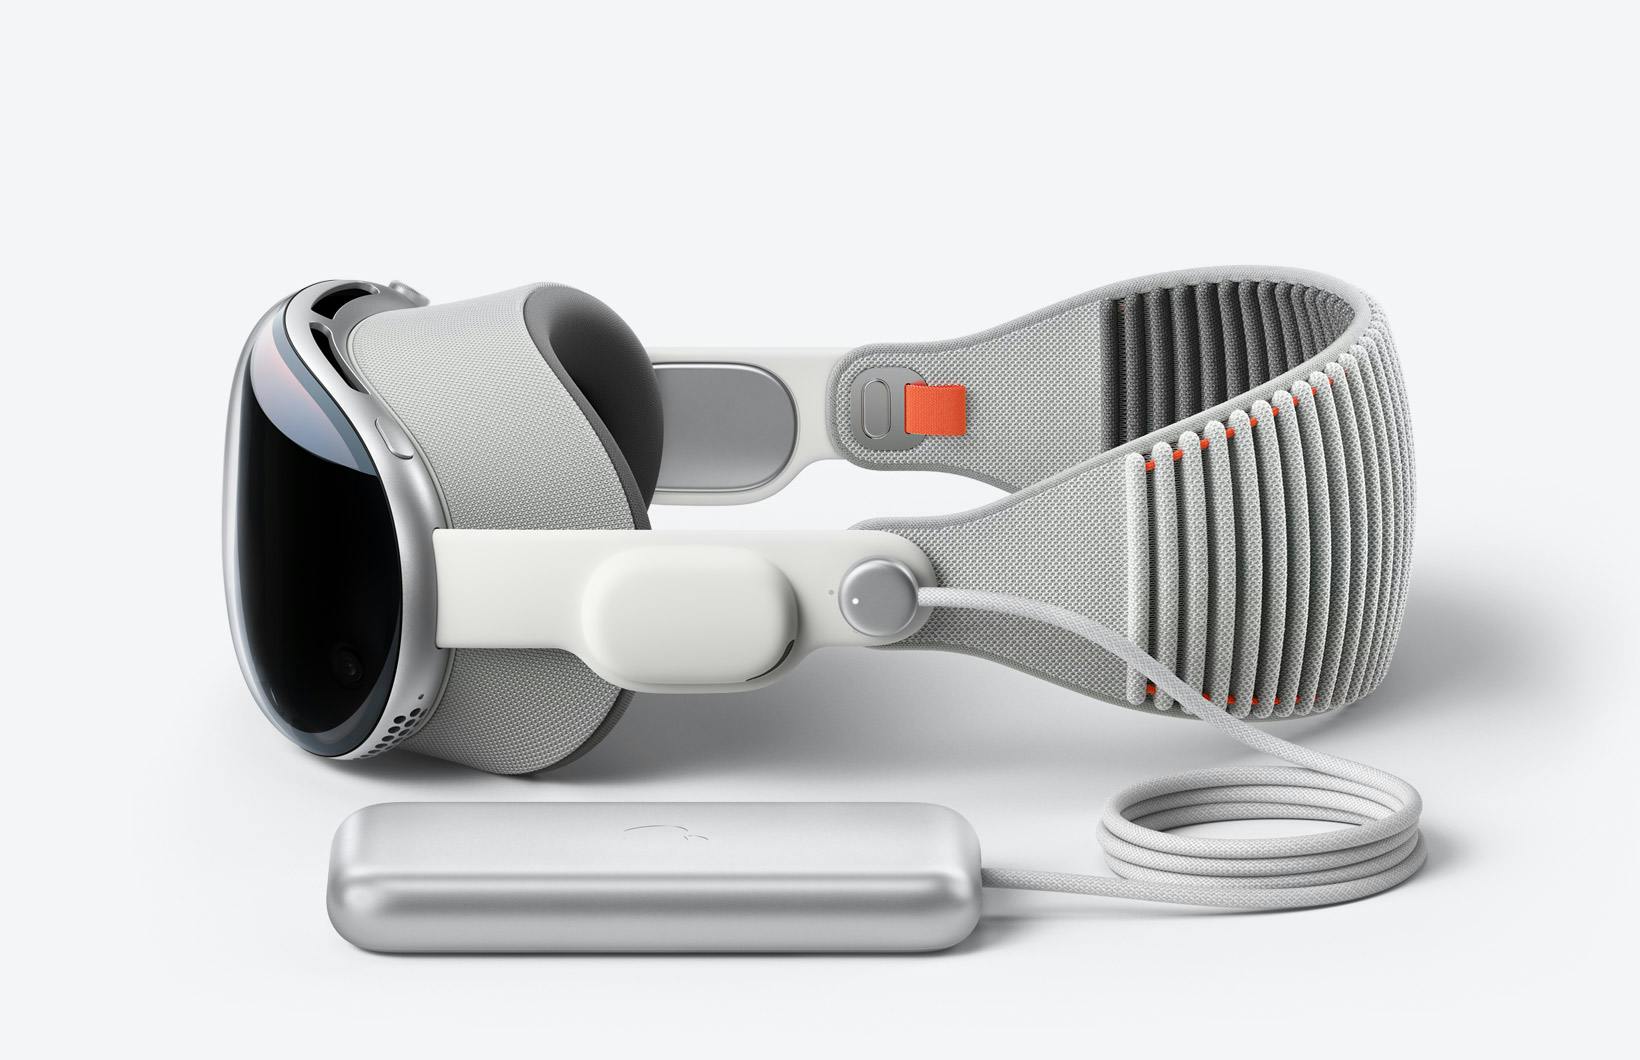 Image of the Apple Vision Pro headset